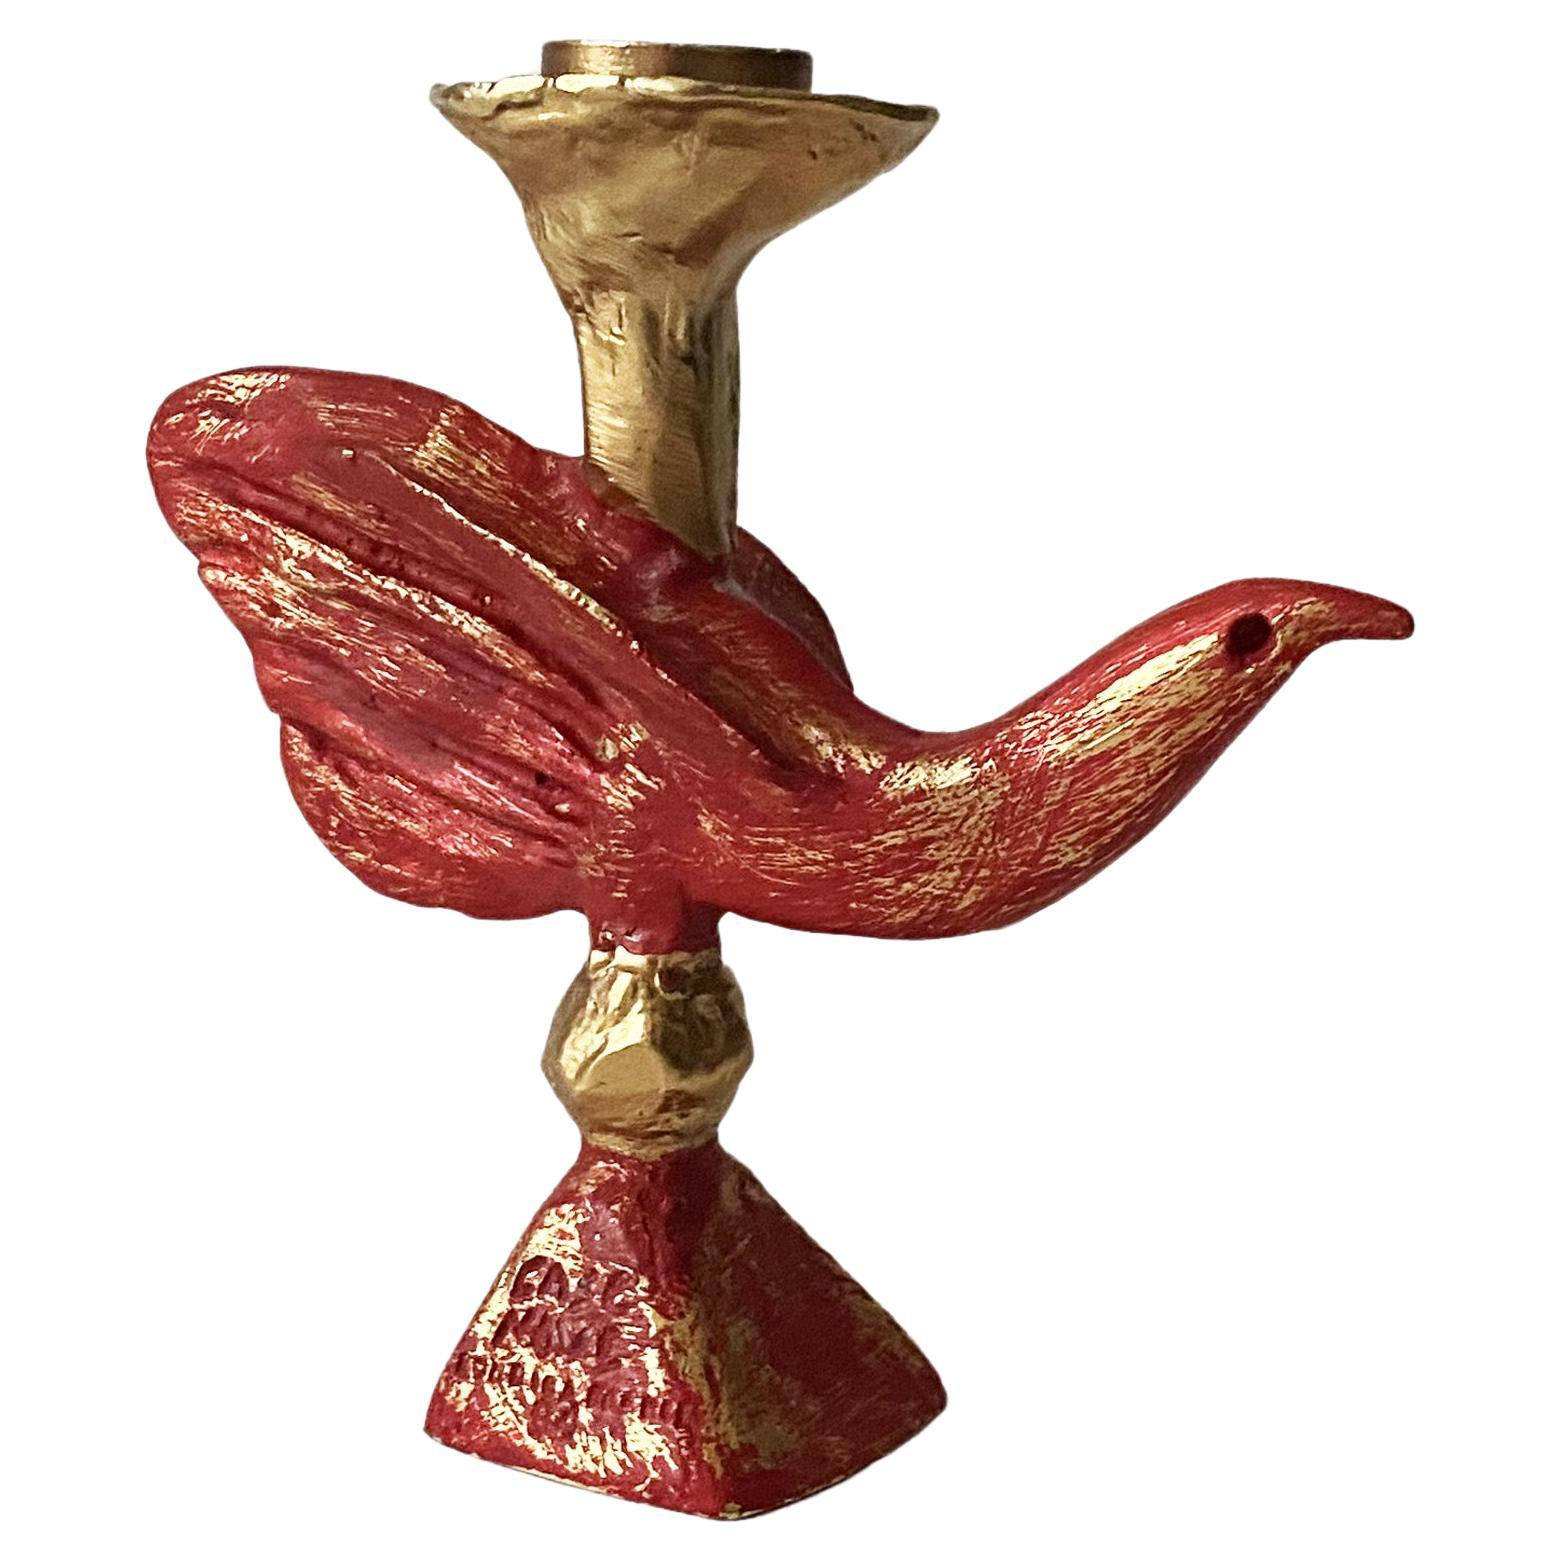 Gilded & Red Sculptural Bird Candlestick by Pierre Casenove for Fondica, 1990s. For Sale